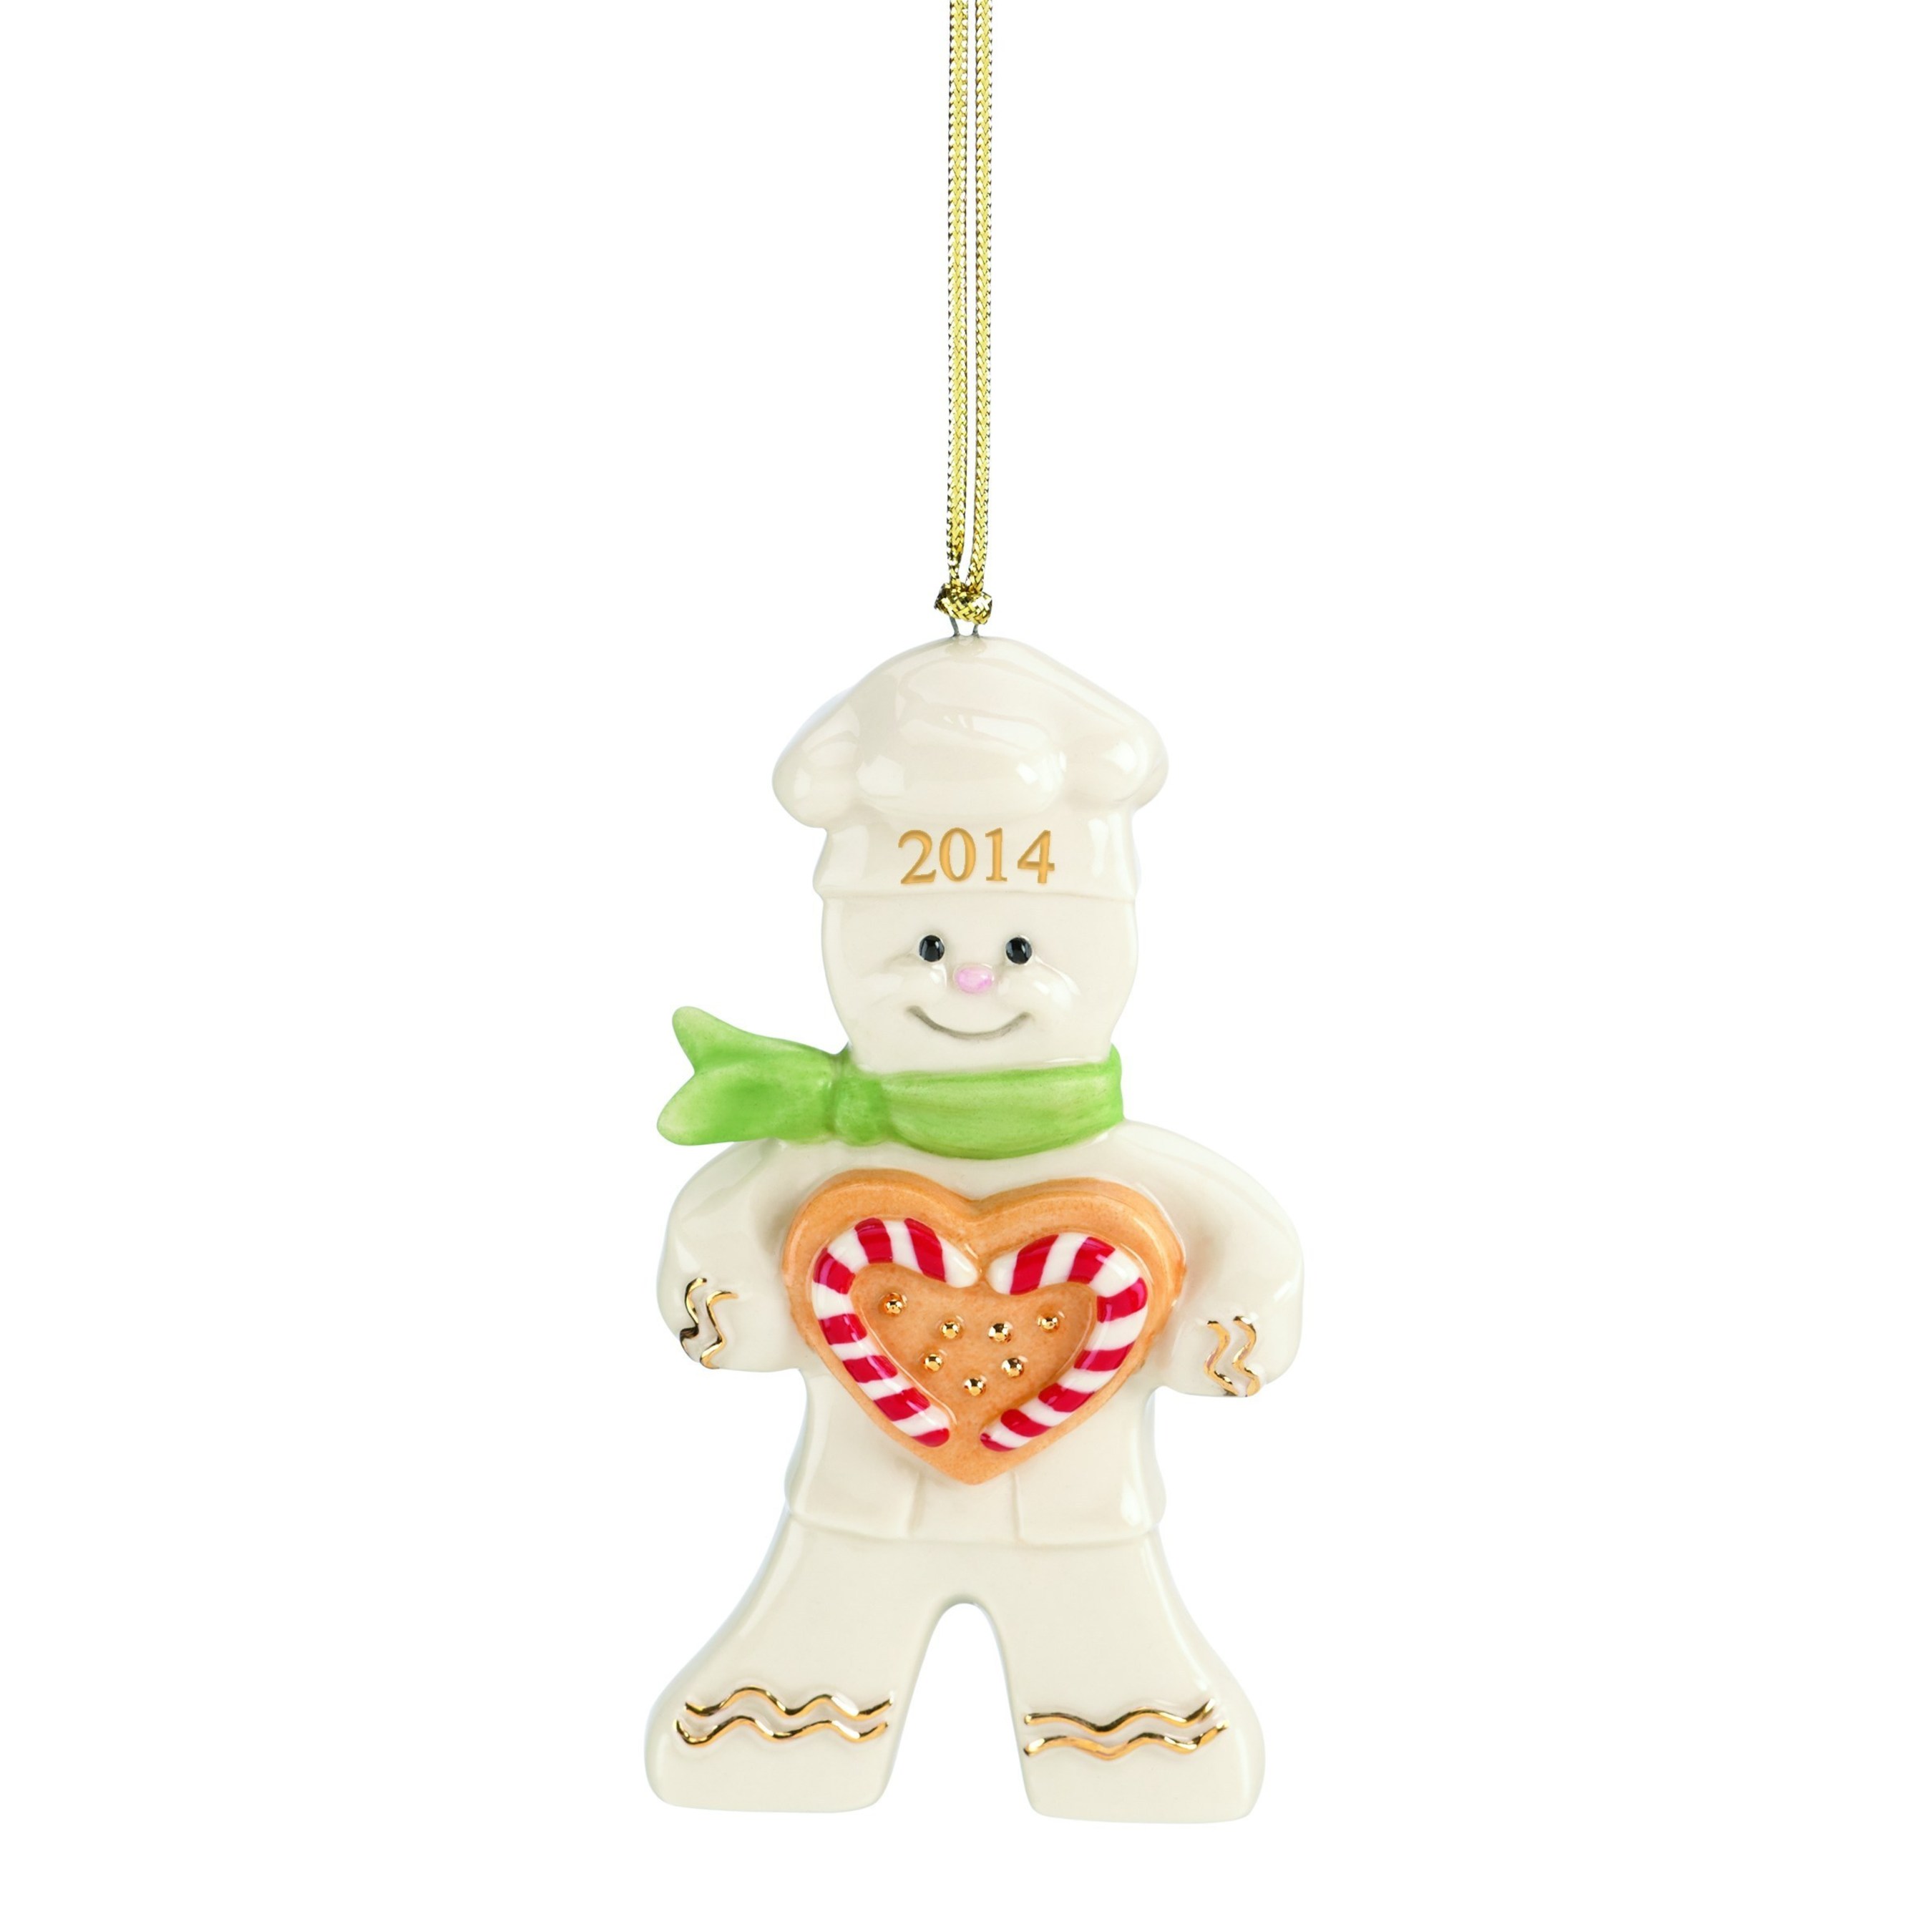 Lenox 2014 Peppermint Love Gingerbread Ornament - This sweet friend holds a warm gingerbread heart embellished with candy canes and gold accents.